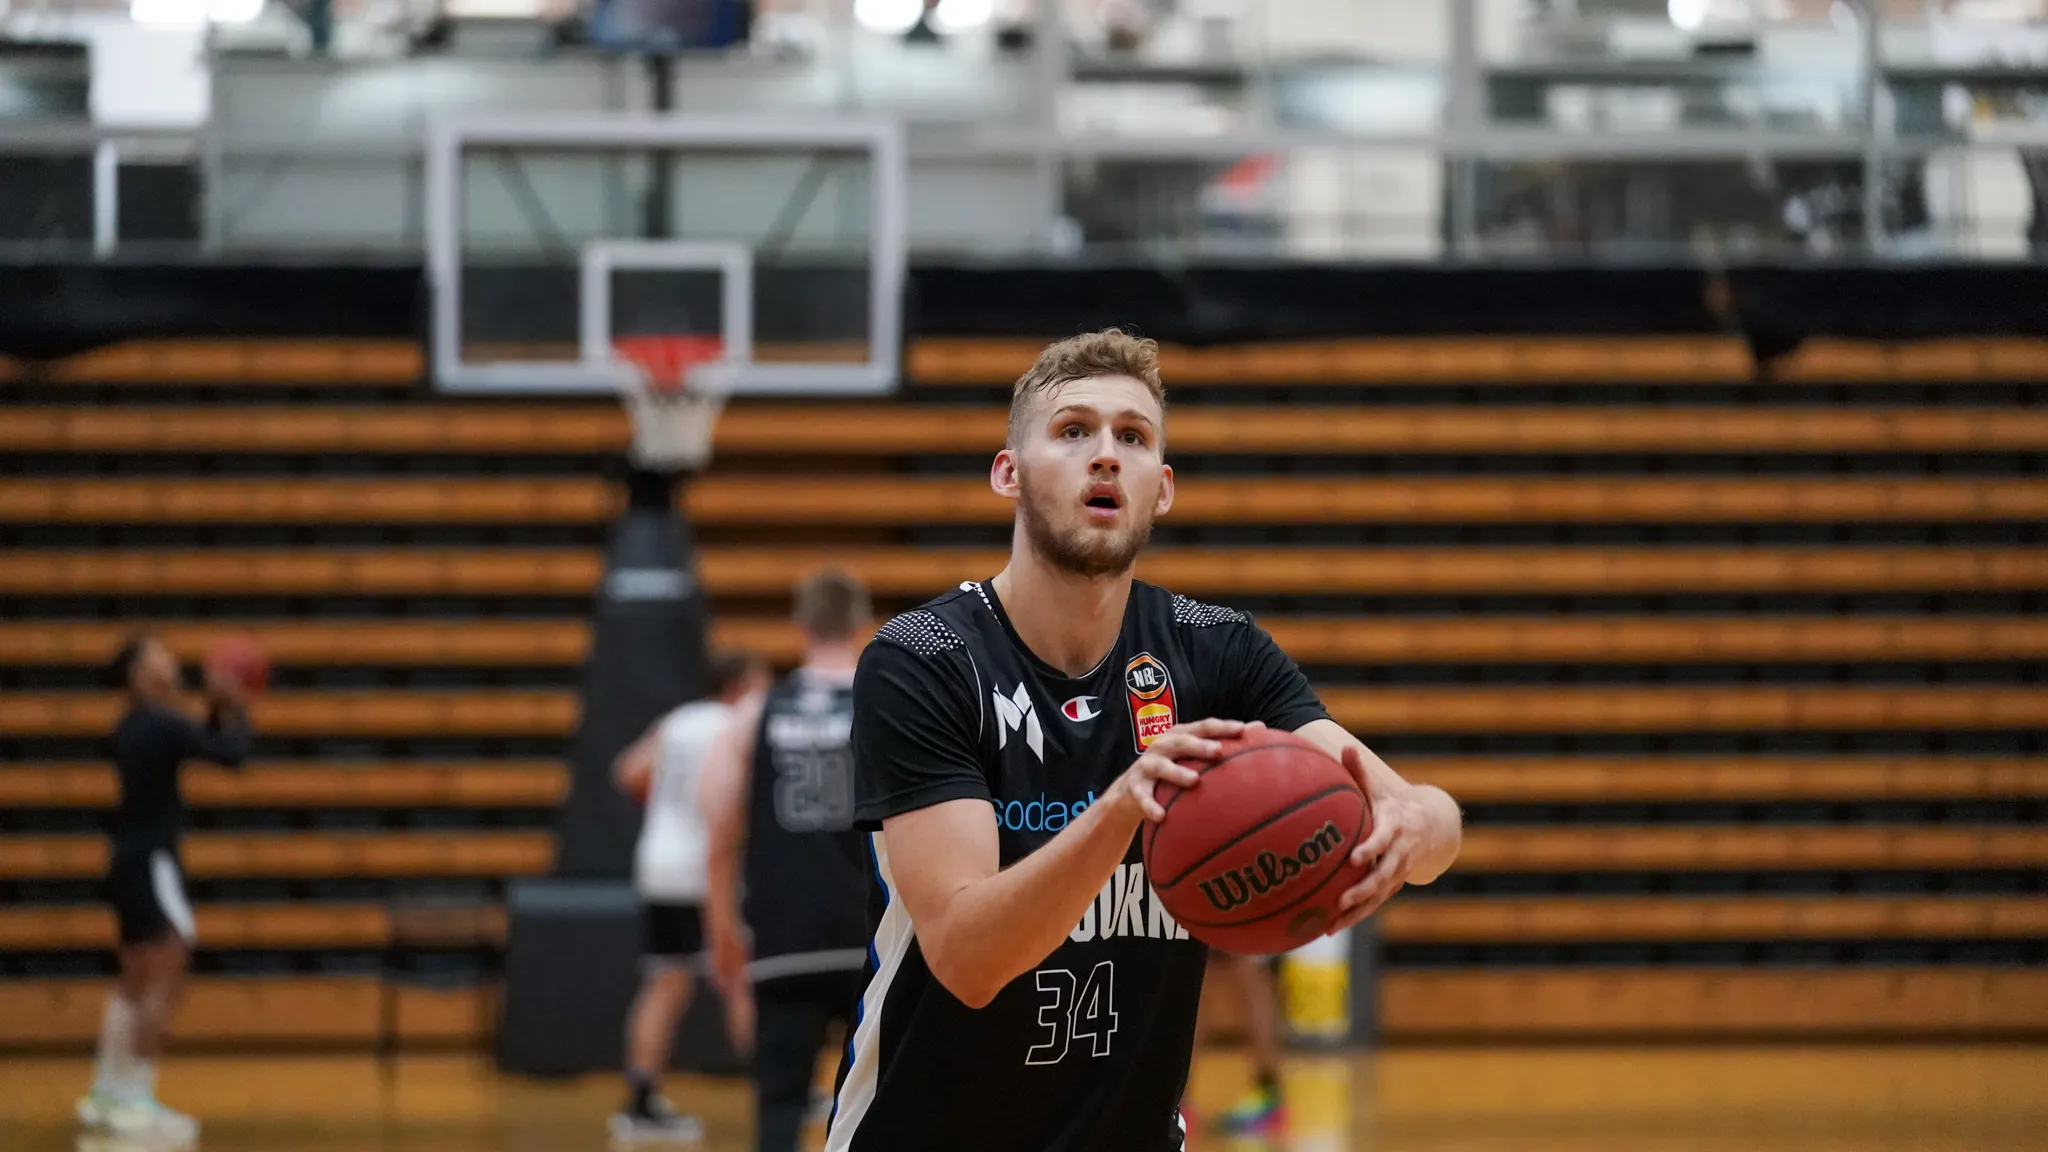 Jock Landale is home, and he's set to take over the NBL